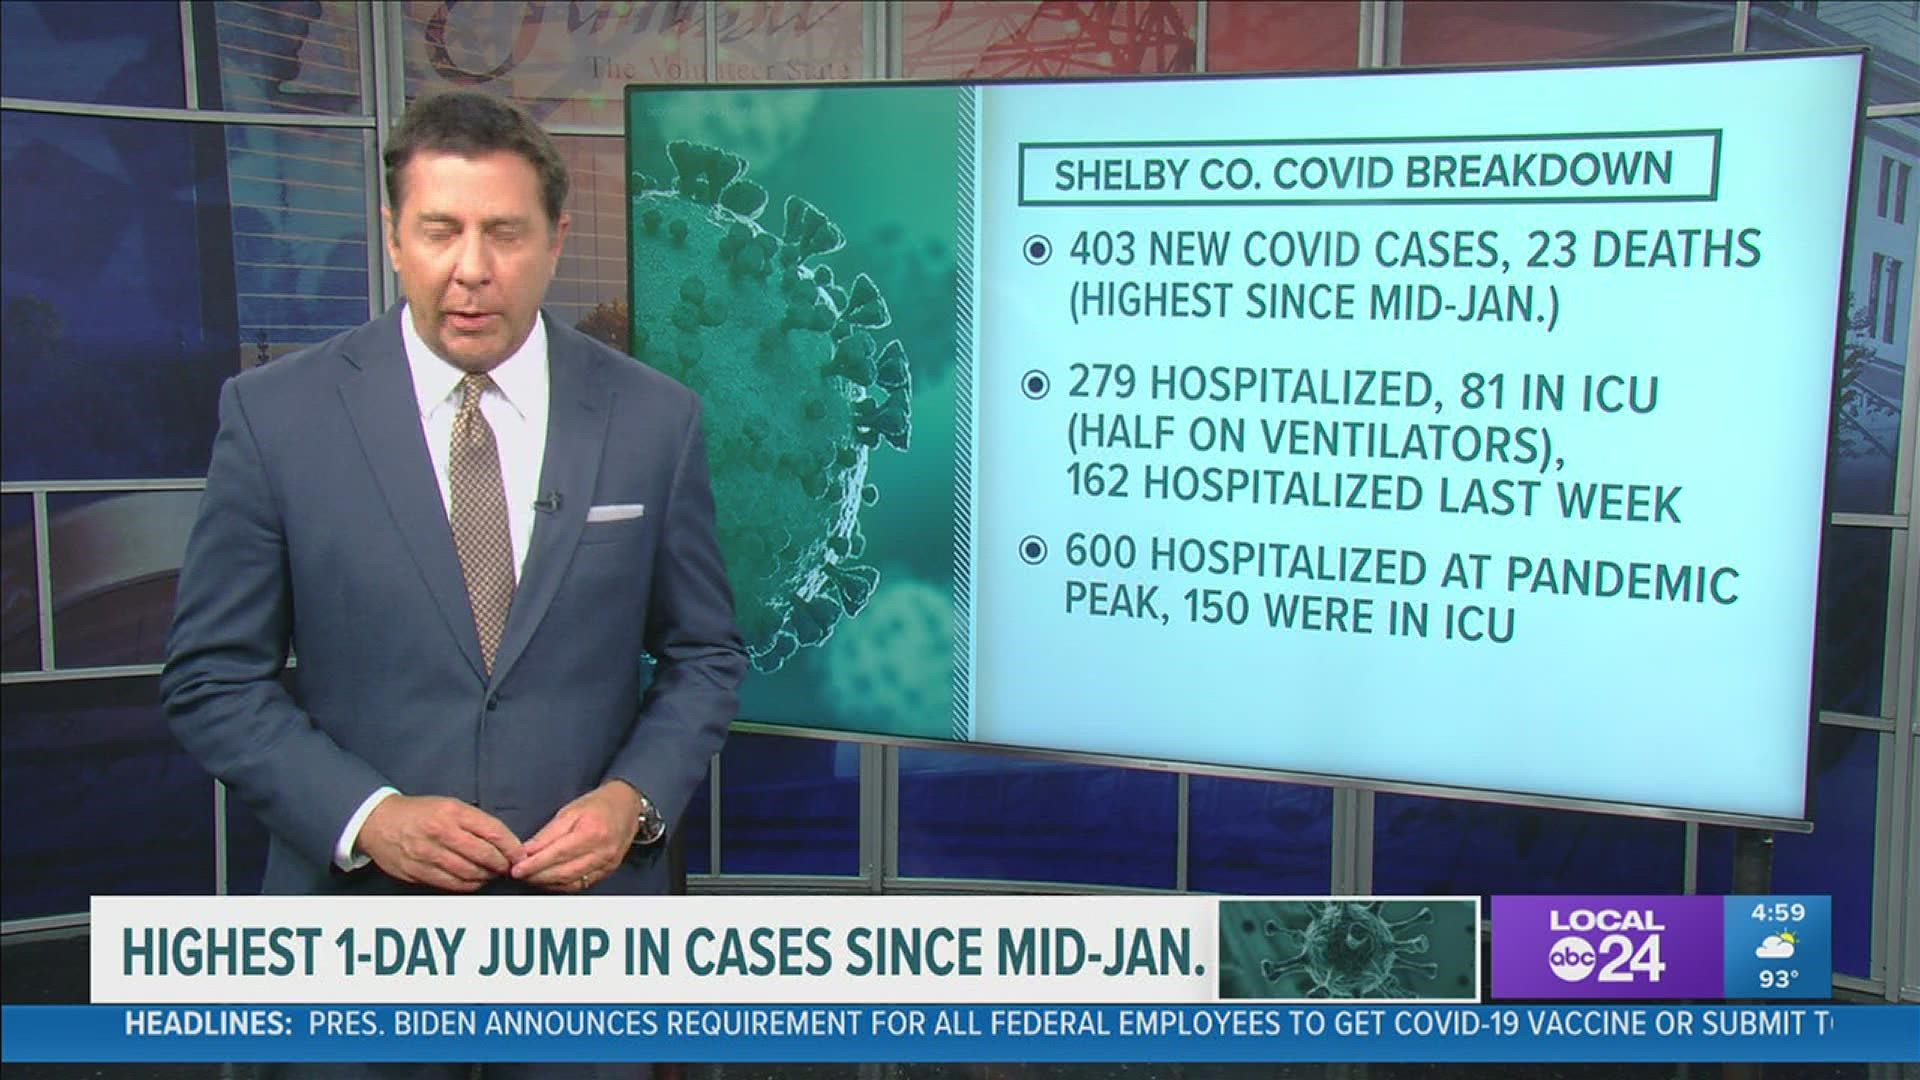 The Shelby County Health Department said Thursday there are 403 new cases for a total of 104,563 cases since the pandemic began in 2020.